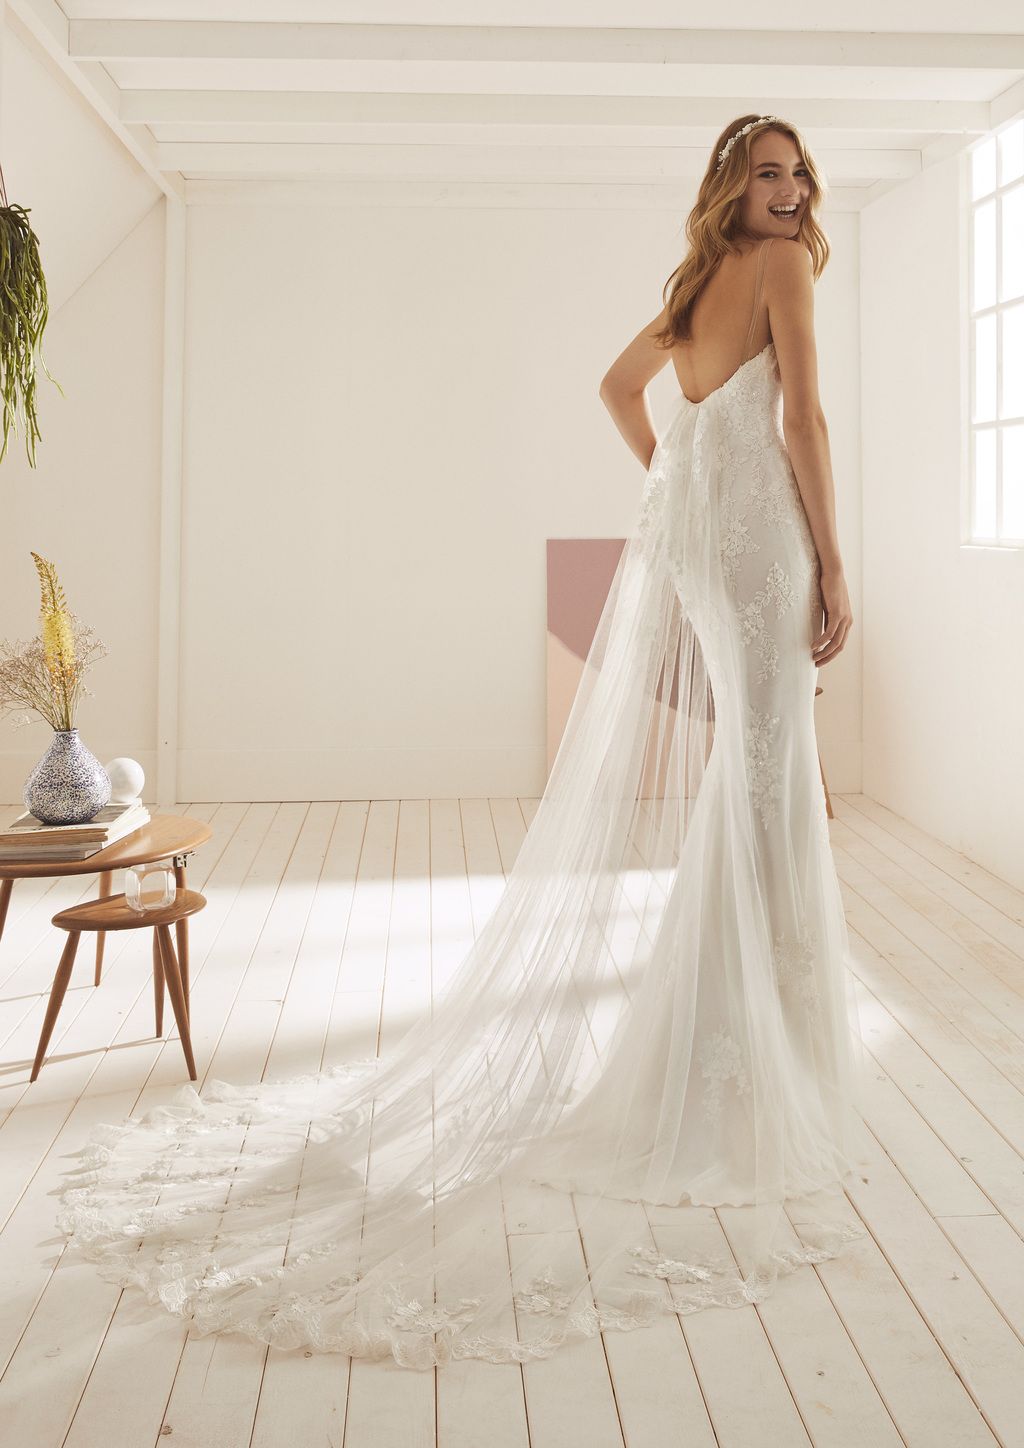 10 Pin-Worthy Wedding Dresses You Need To Try On Right Now ⋆ Ruffled